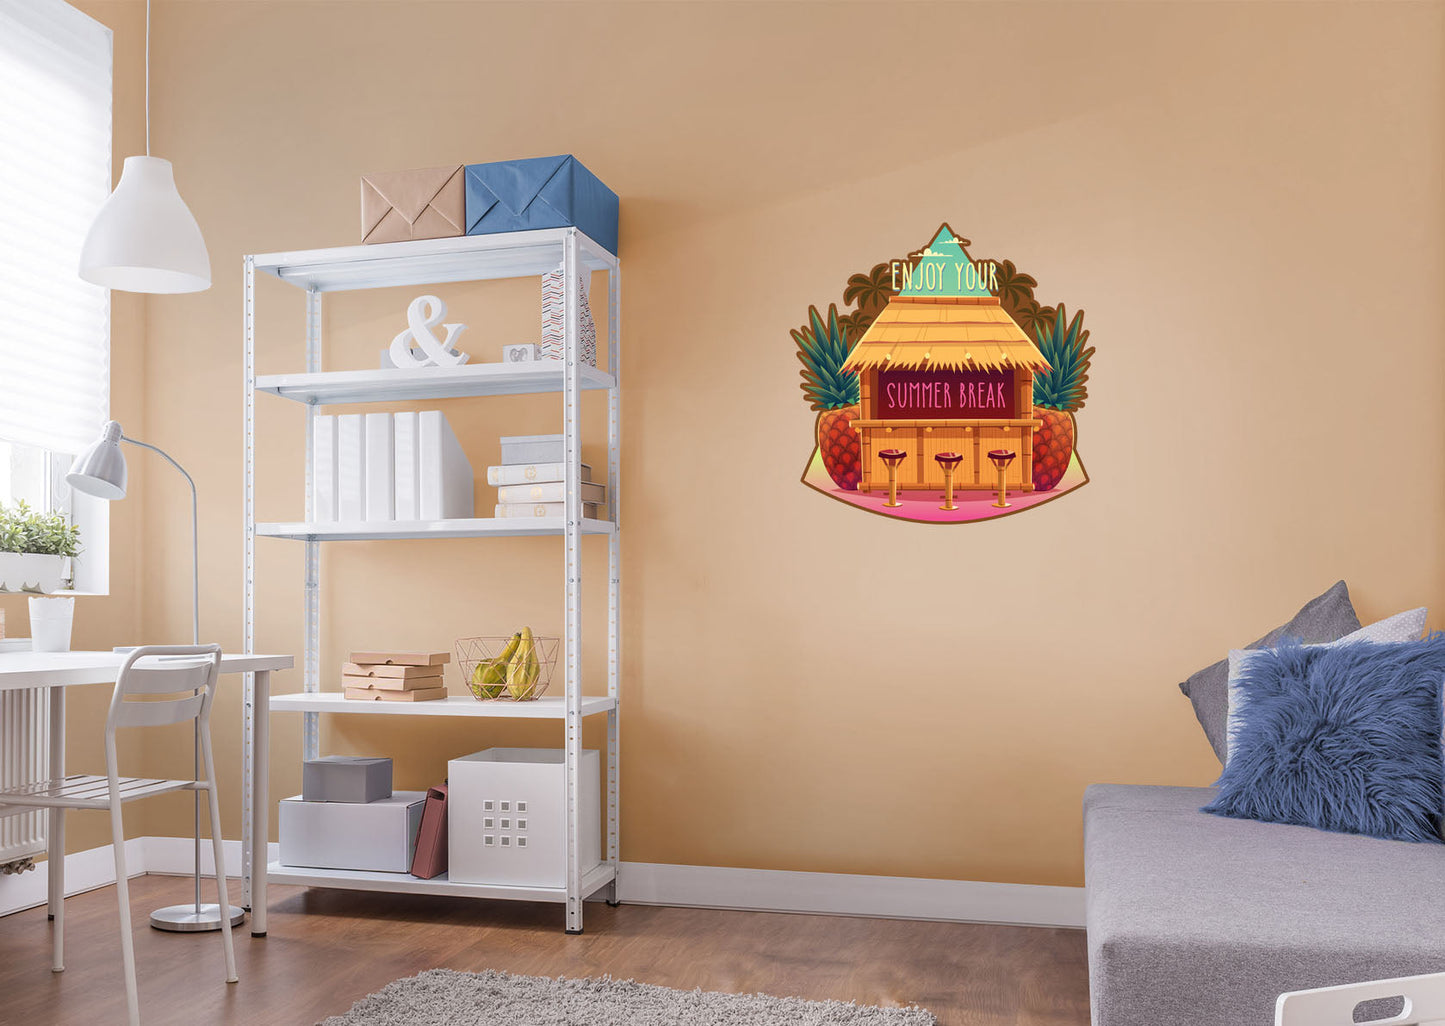 Seasons Decor: Summer Enjoy your Summer Break Icon        -   Removable     Adhesive Decal